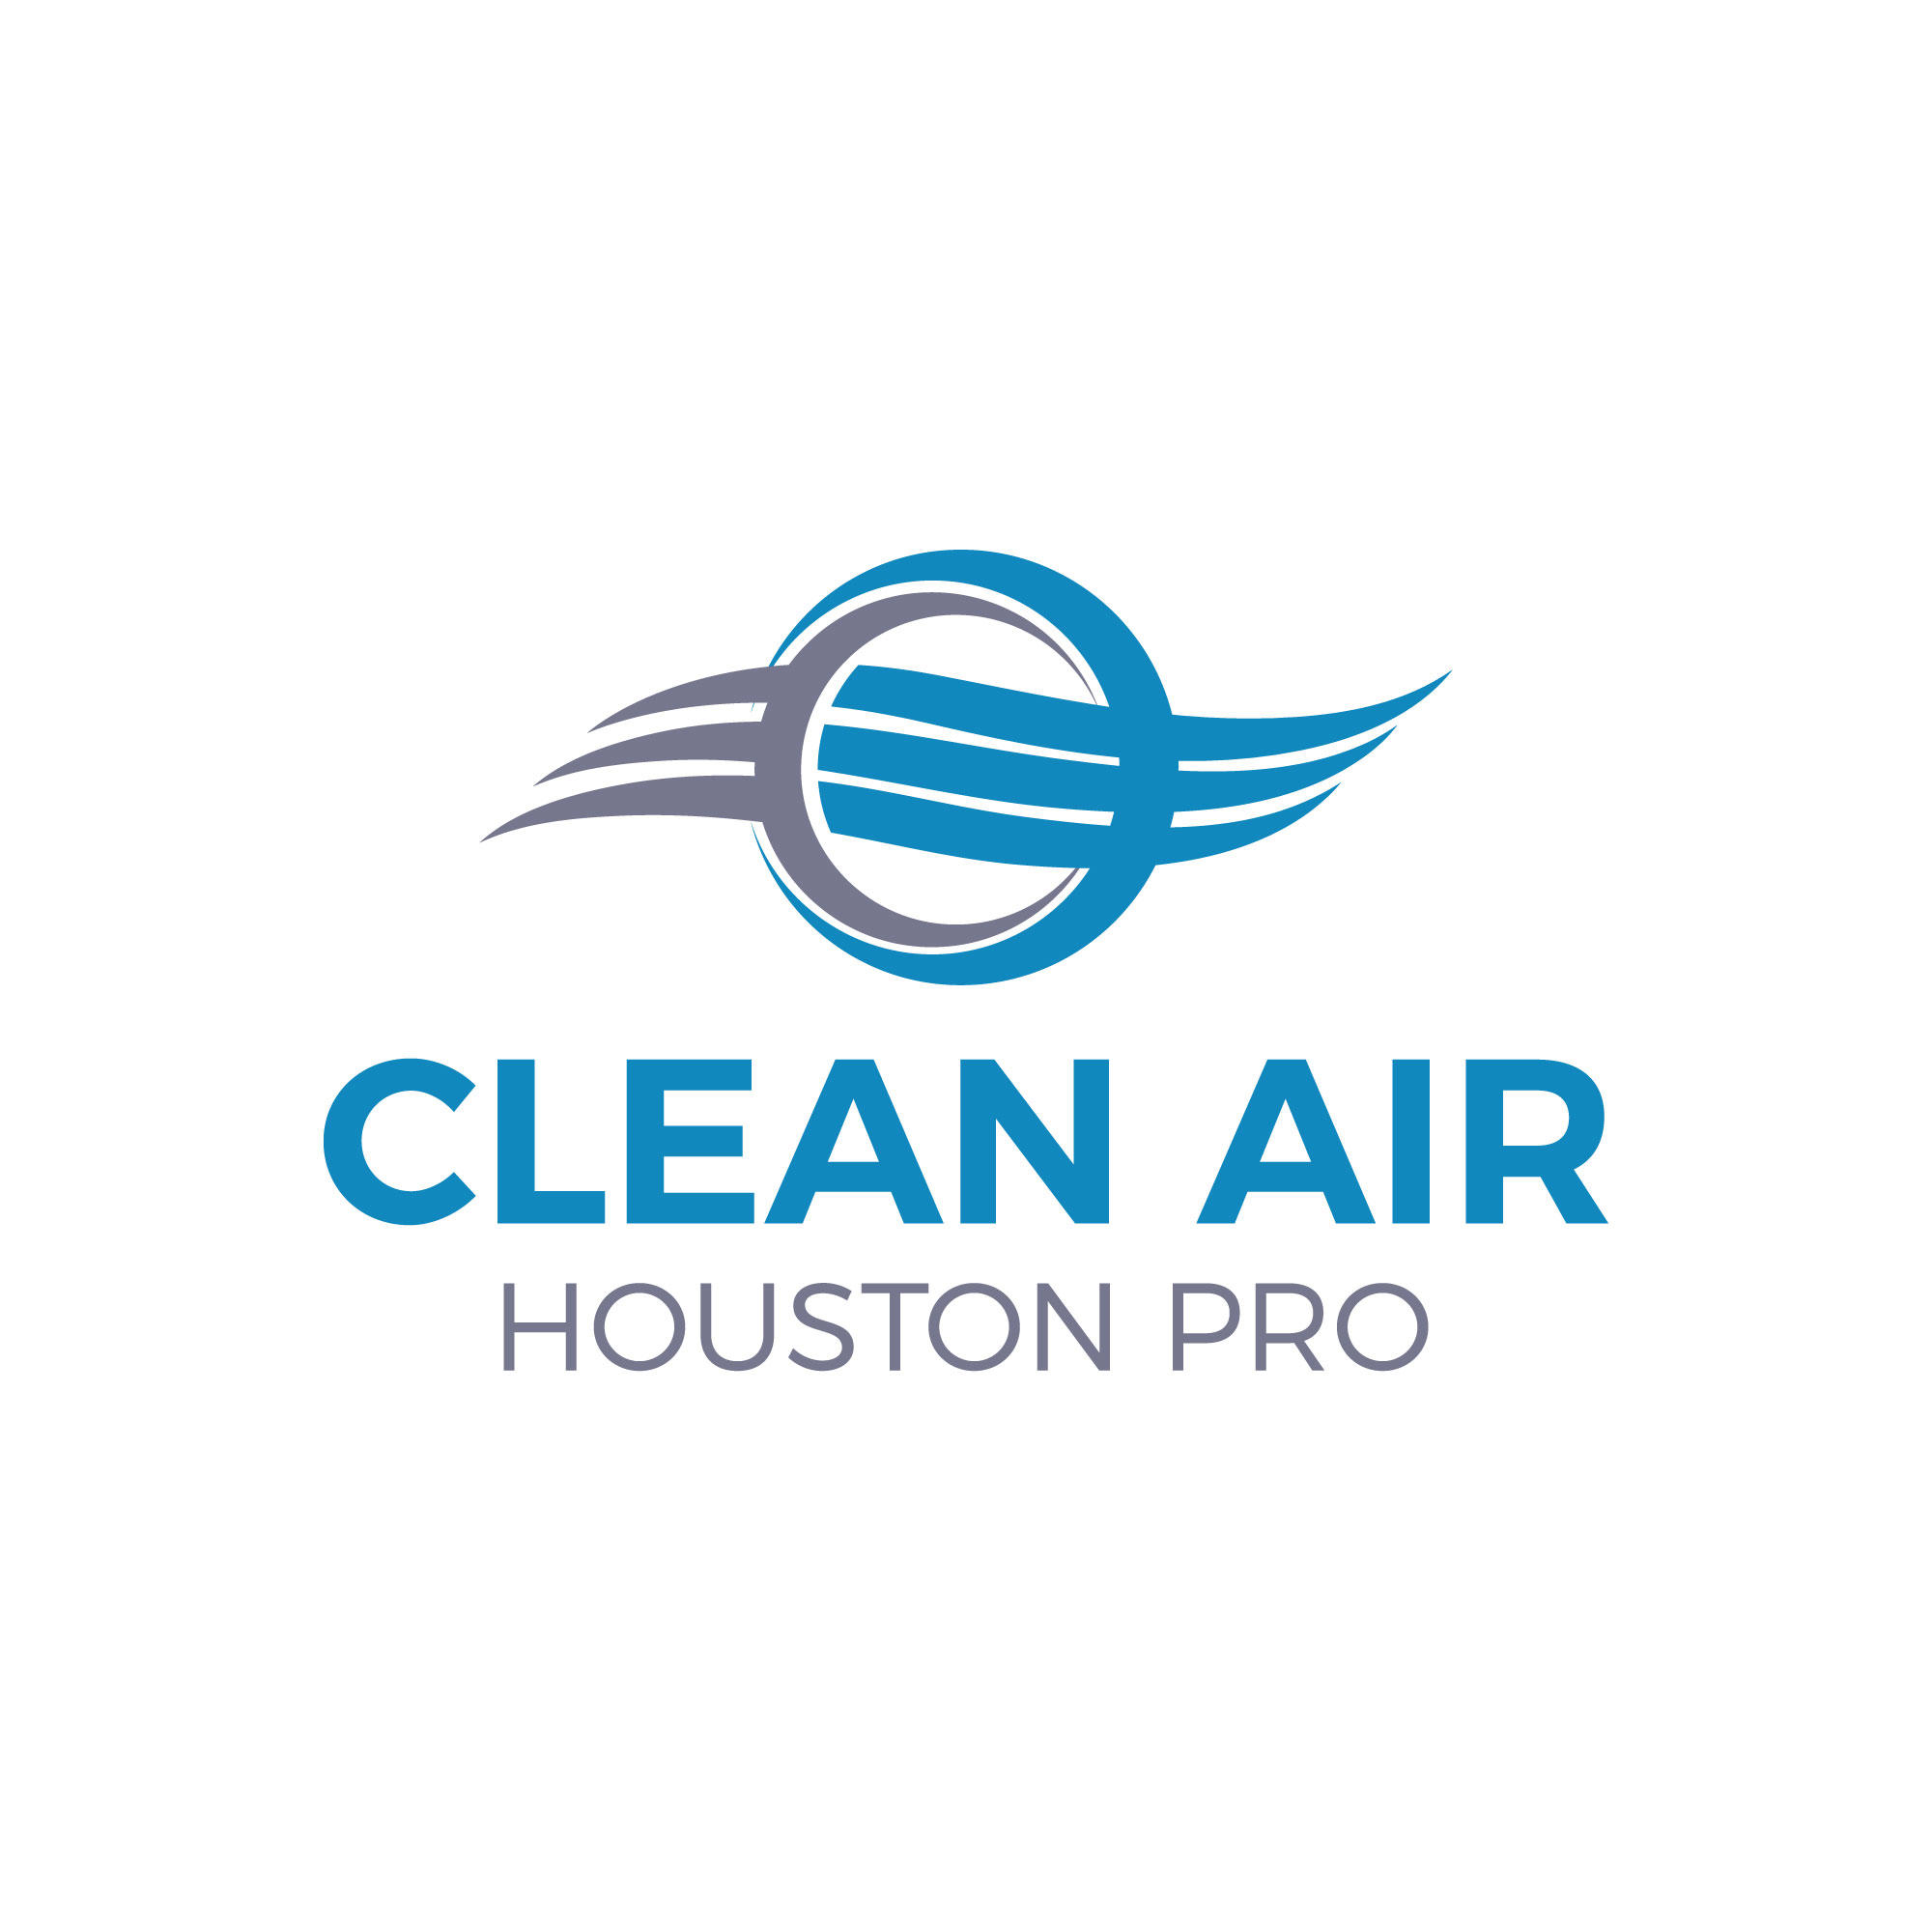 Air Duct Cleaning Houston - Clean Air Houston Pro Logo